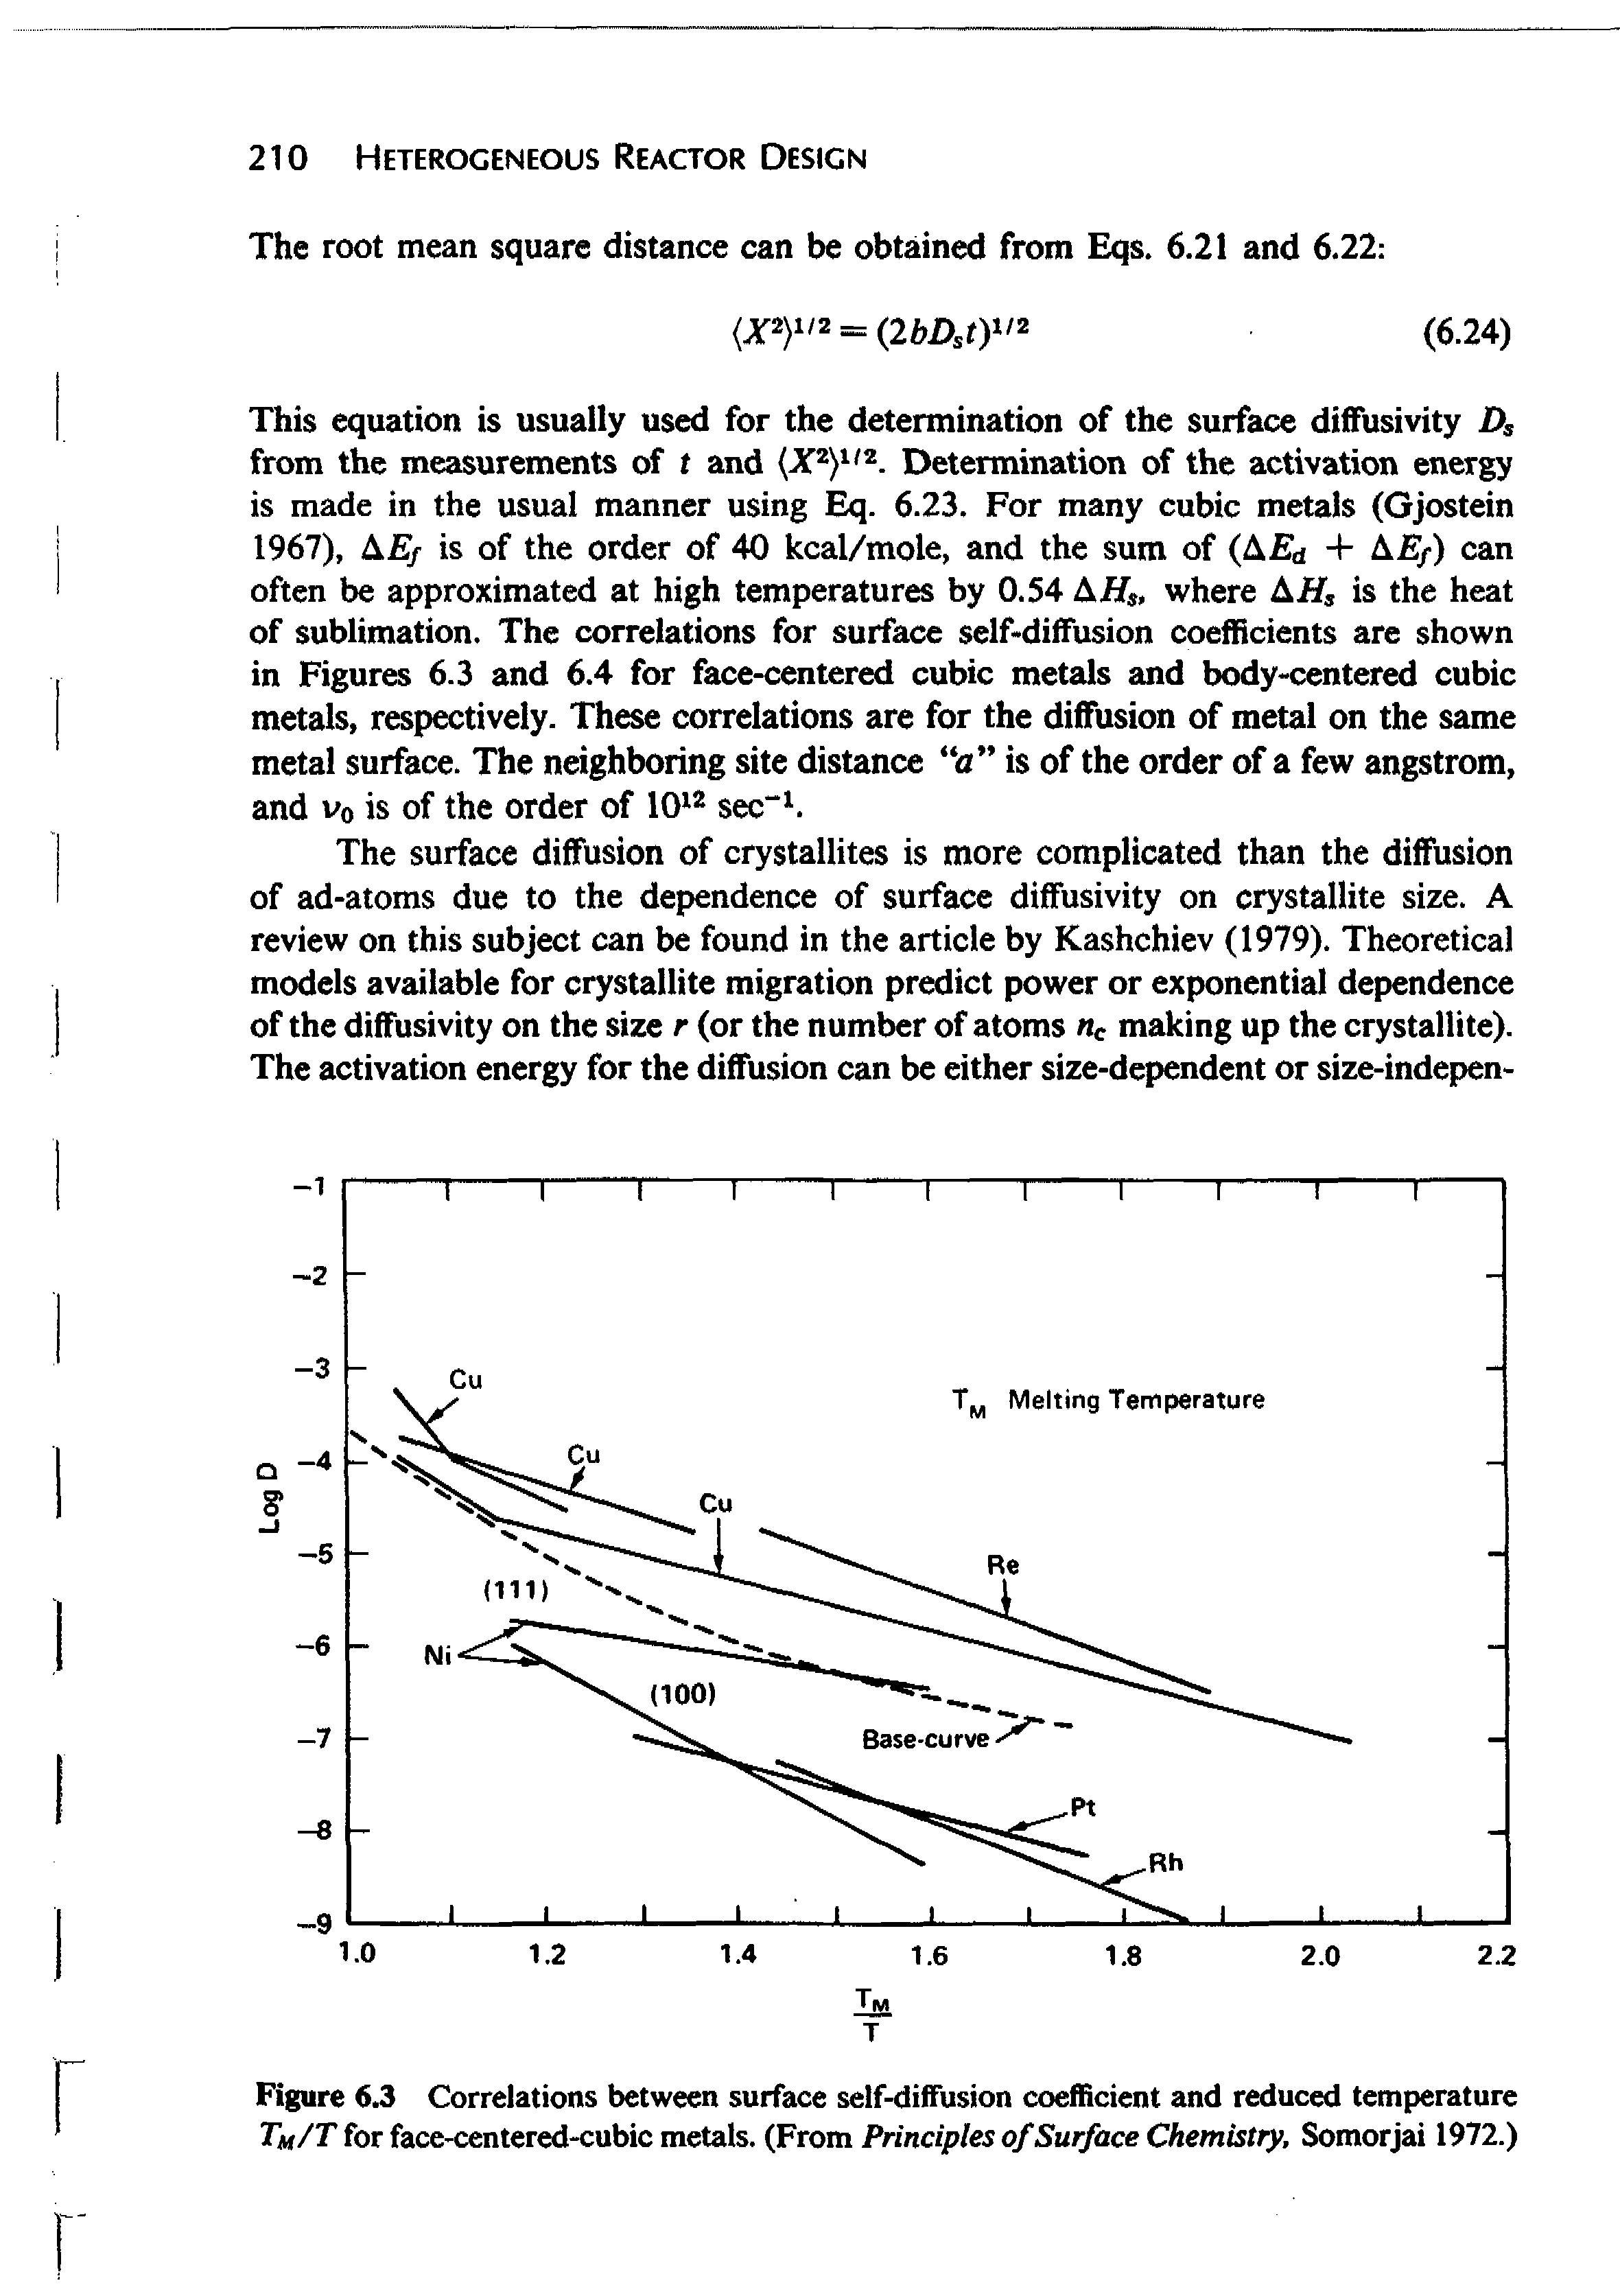 Figure 6.3 Correlations between surface self-diffusion coefficient and reduced temperature Tu/T for face-centered-cubic metals. (From Principles of Surface Chemistry, Somorjai 1972.)...